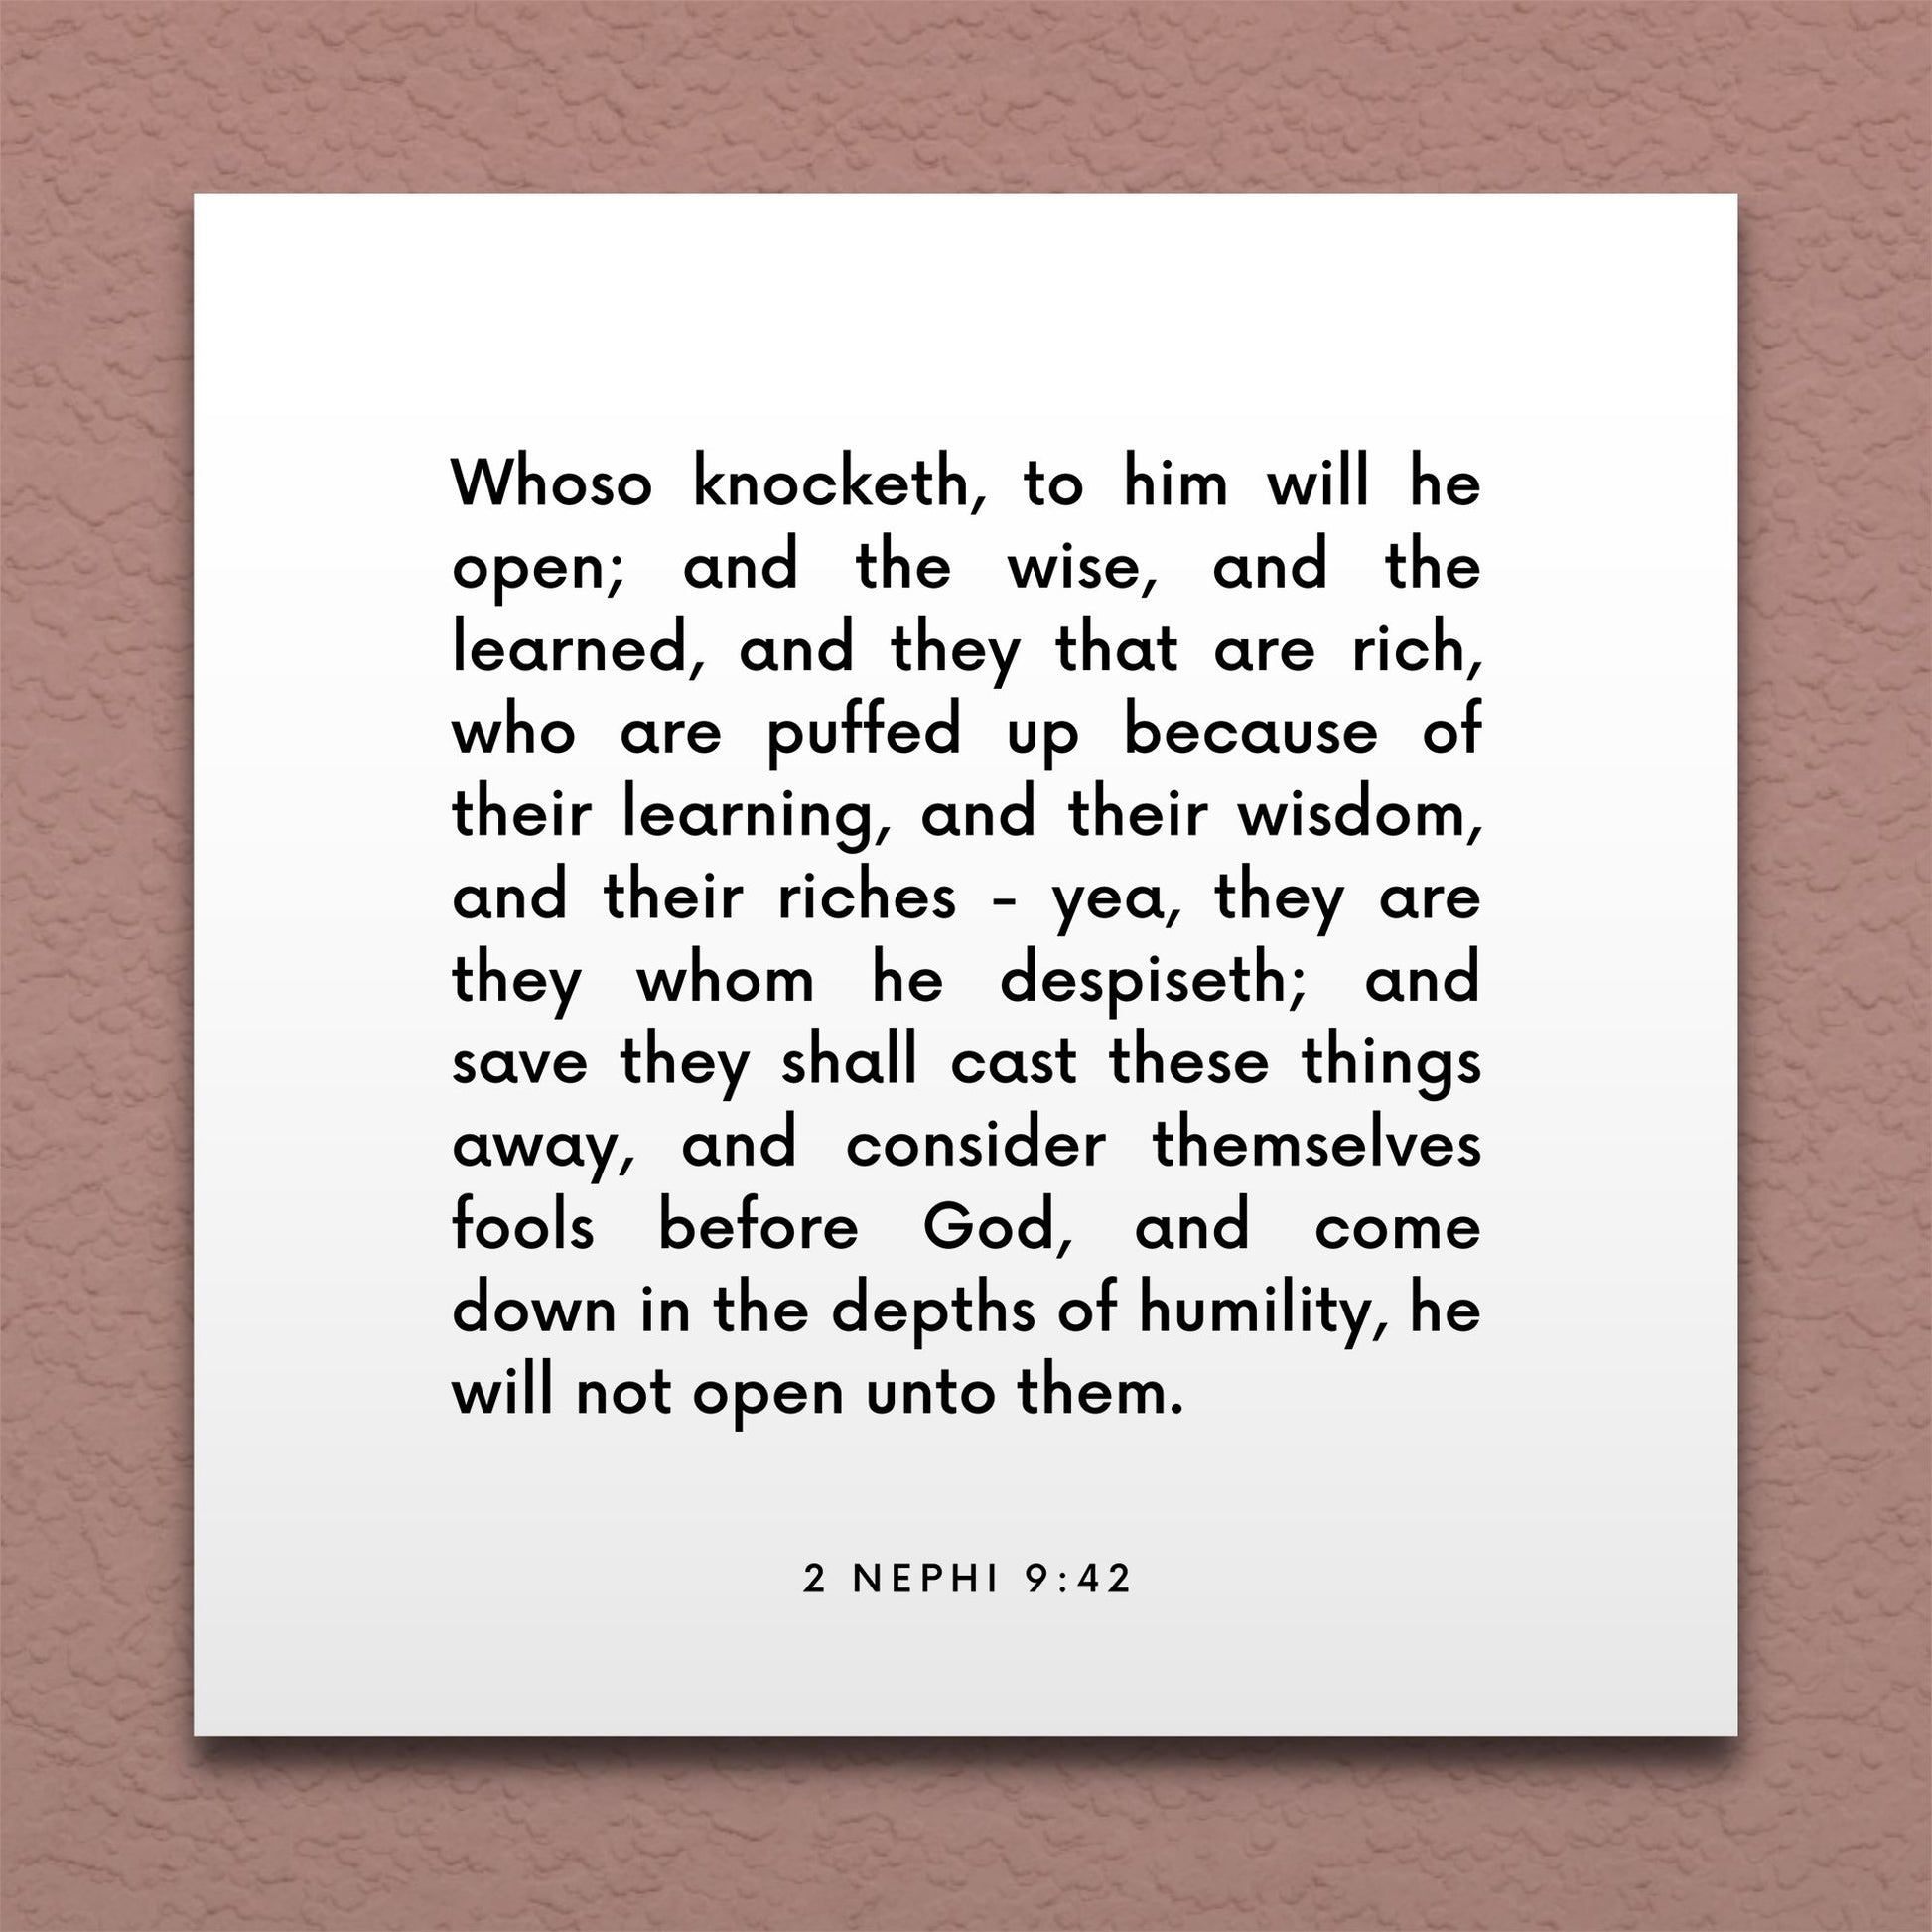 Wall-mounted scripture tile for 2 Nephi 9:42 - "Whoso knocketh, to him will he open"